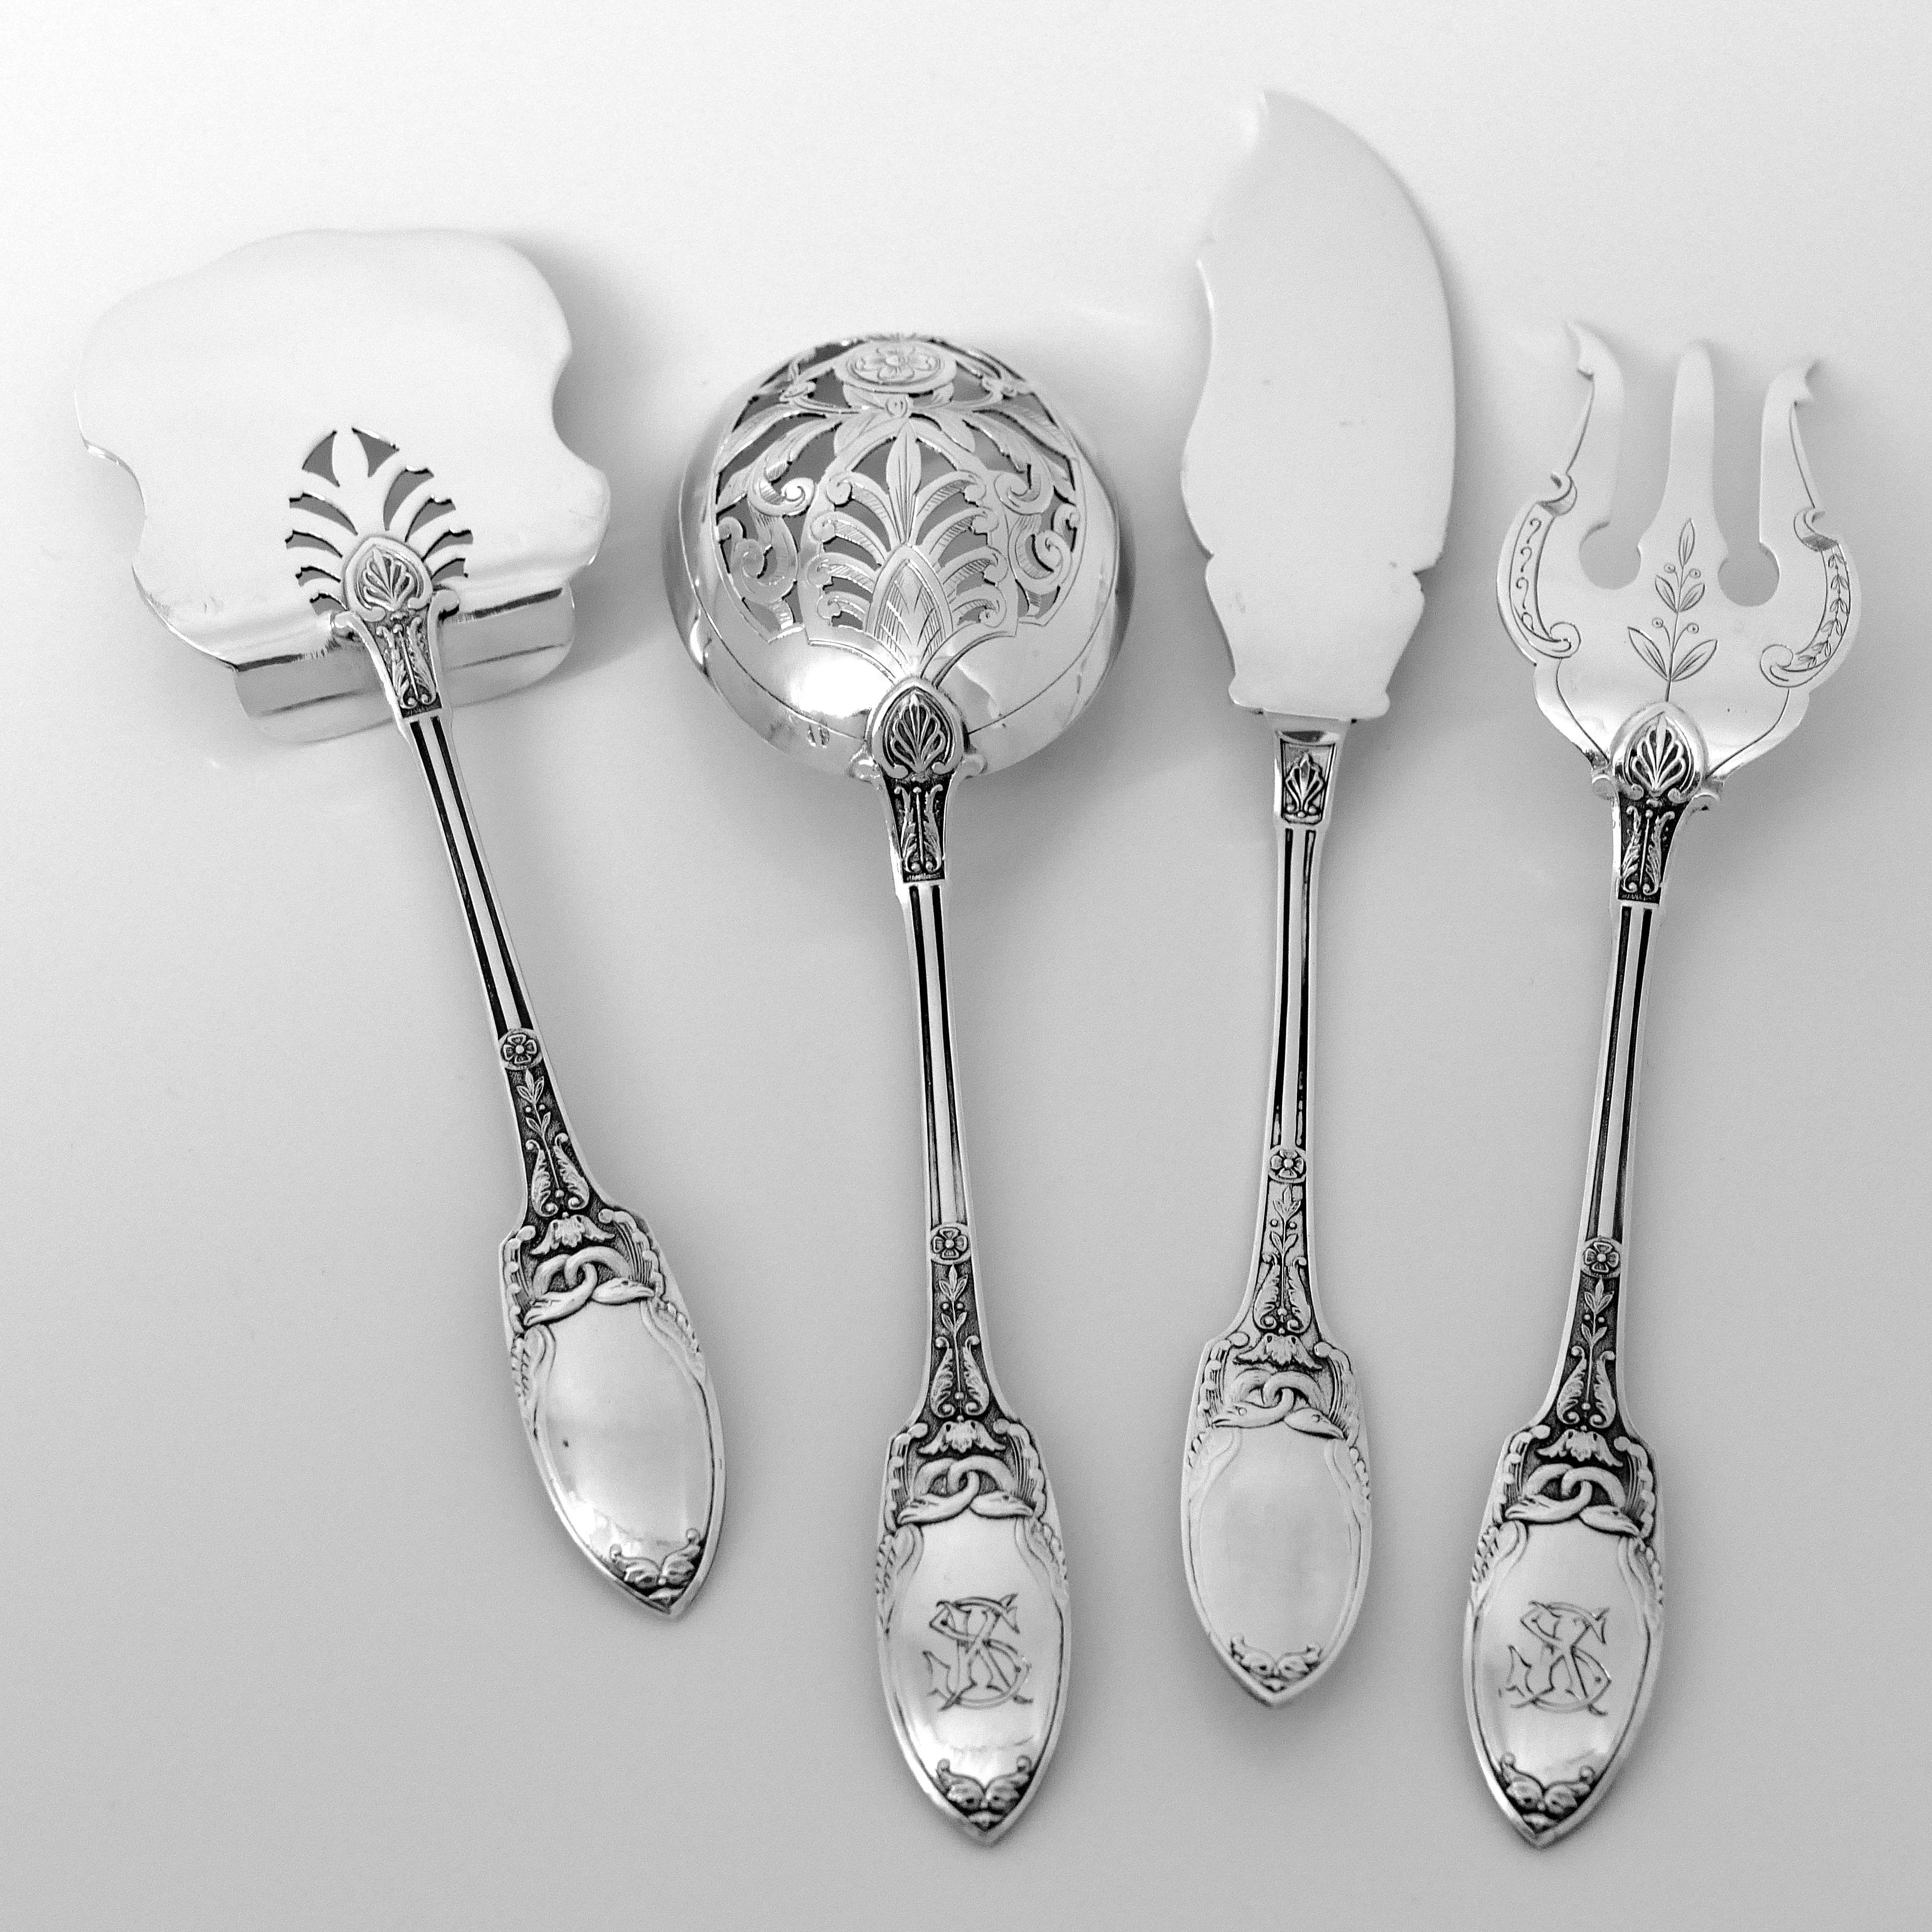 Combeau Rare French All Sterling Silver Dessert Set 4 Pc, Empire, Swans For Sale 5